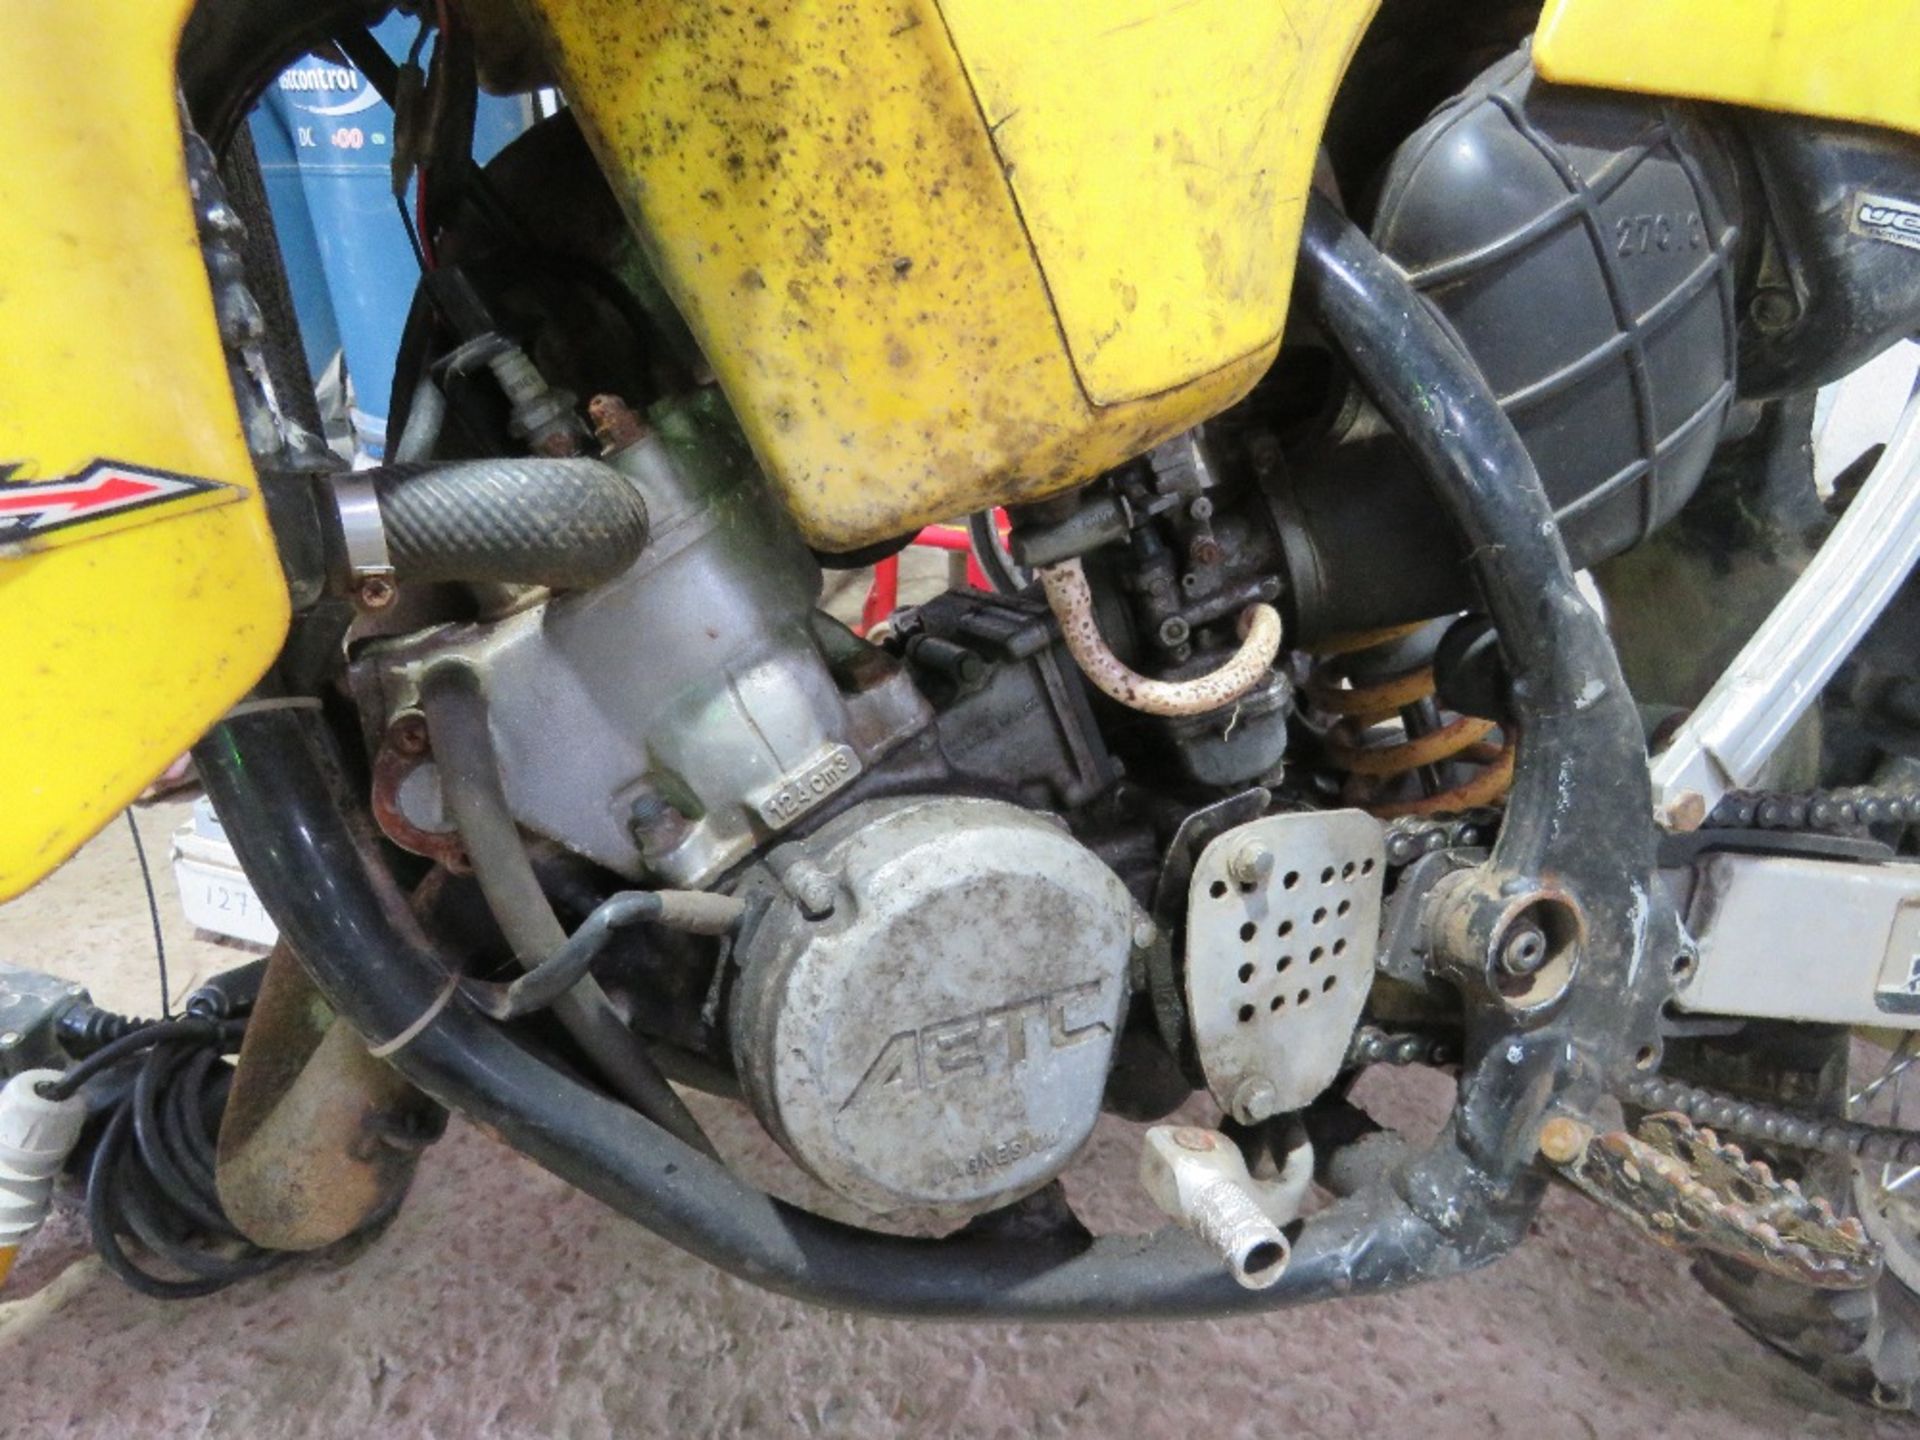 SUZUKI MOTOCROSS TRIALS MOTORBIKE. BEEN IN STORAGE AND UNUSED FOR OVER 5 YEARS. THIS LOT I - Image 8 of 9